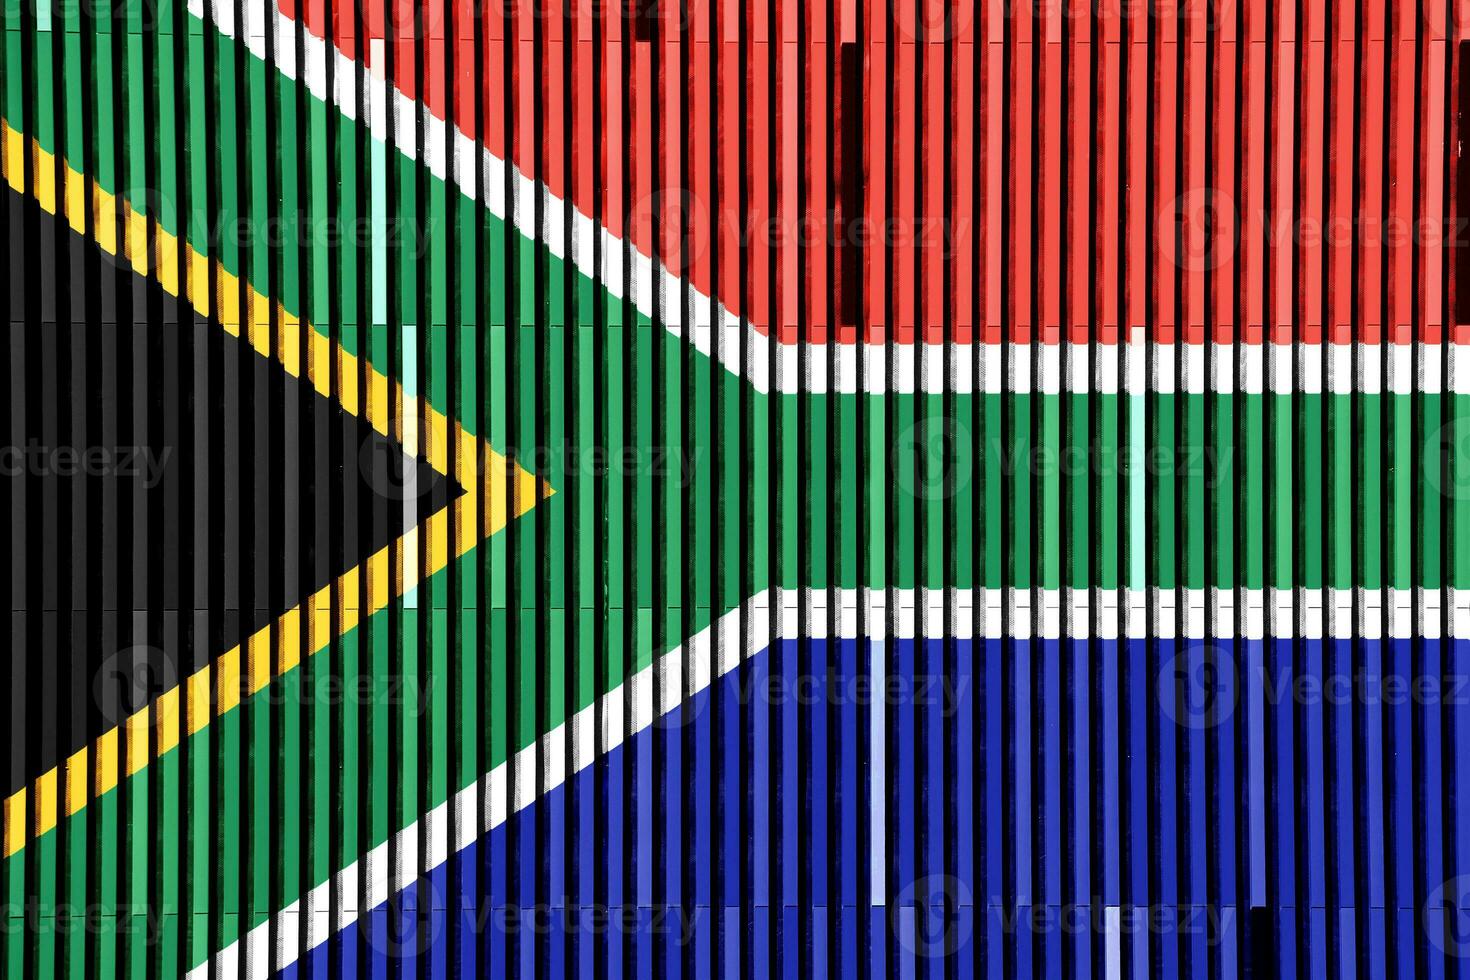 Flag of Republic of South Africa on a textured background. Concept collage. photo